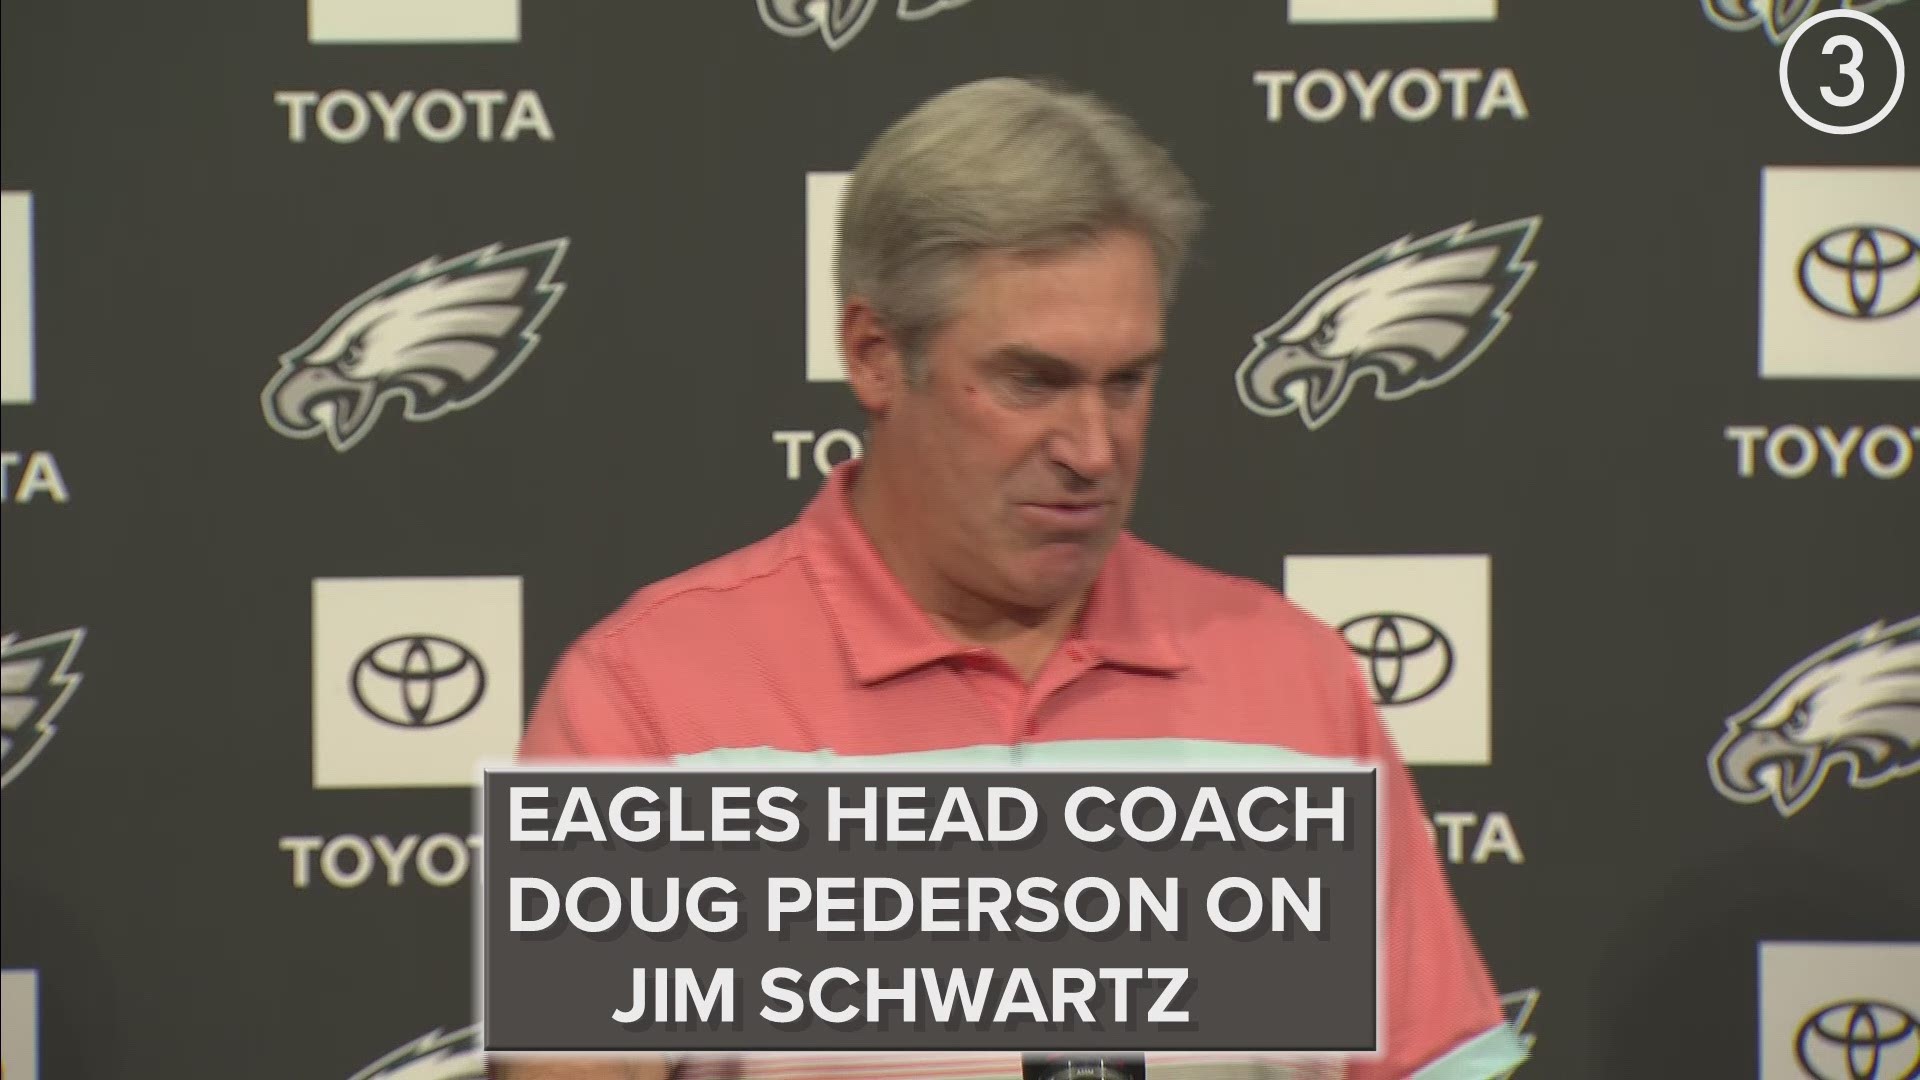 According to Ian Rapoport of the NFL Network, Eagles head coach Doug Pederson believes Jim Schwartz is a 'top candidate' for the Browns' head coaching job.